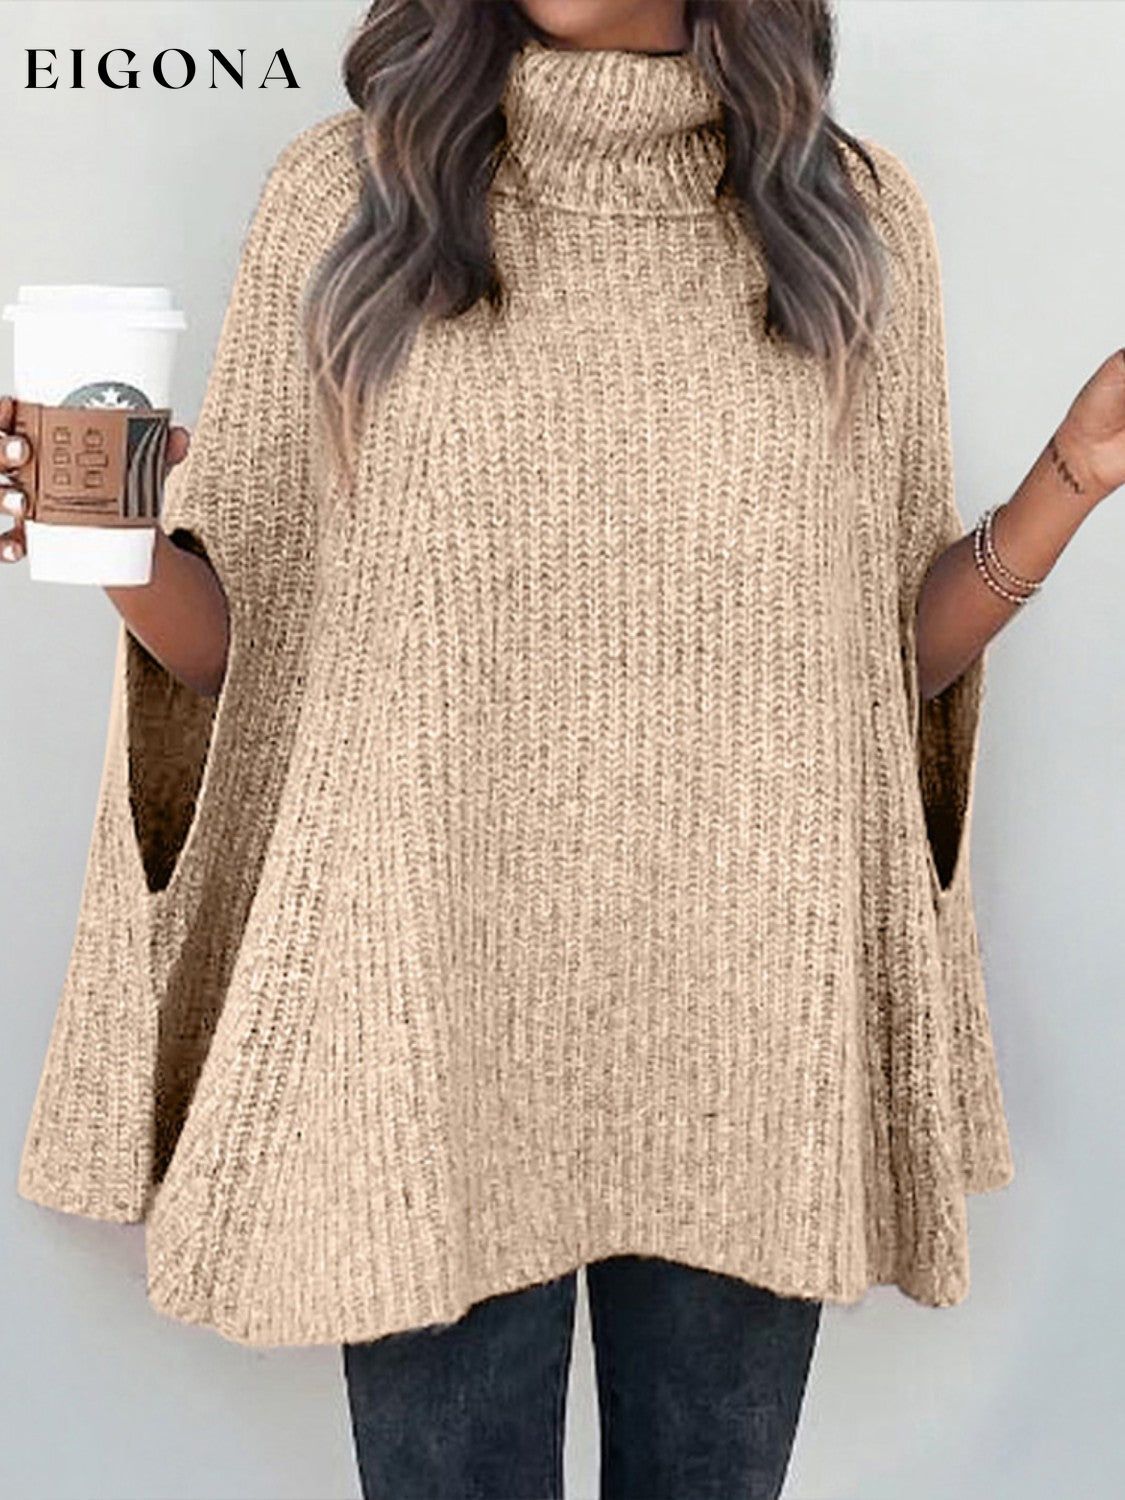 Turtleneck Dolman Sleeve Poncho Fashion Sweater Tan clothes long sleeve Romantichut Ship From Overseas Shipping Delay 09/29/2023 - 10/04/2023 Sweater sweaters turtleneck